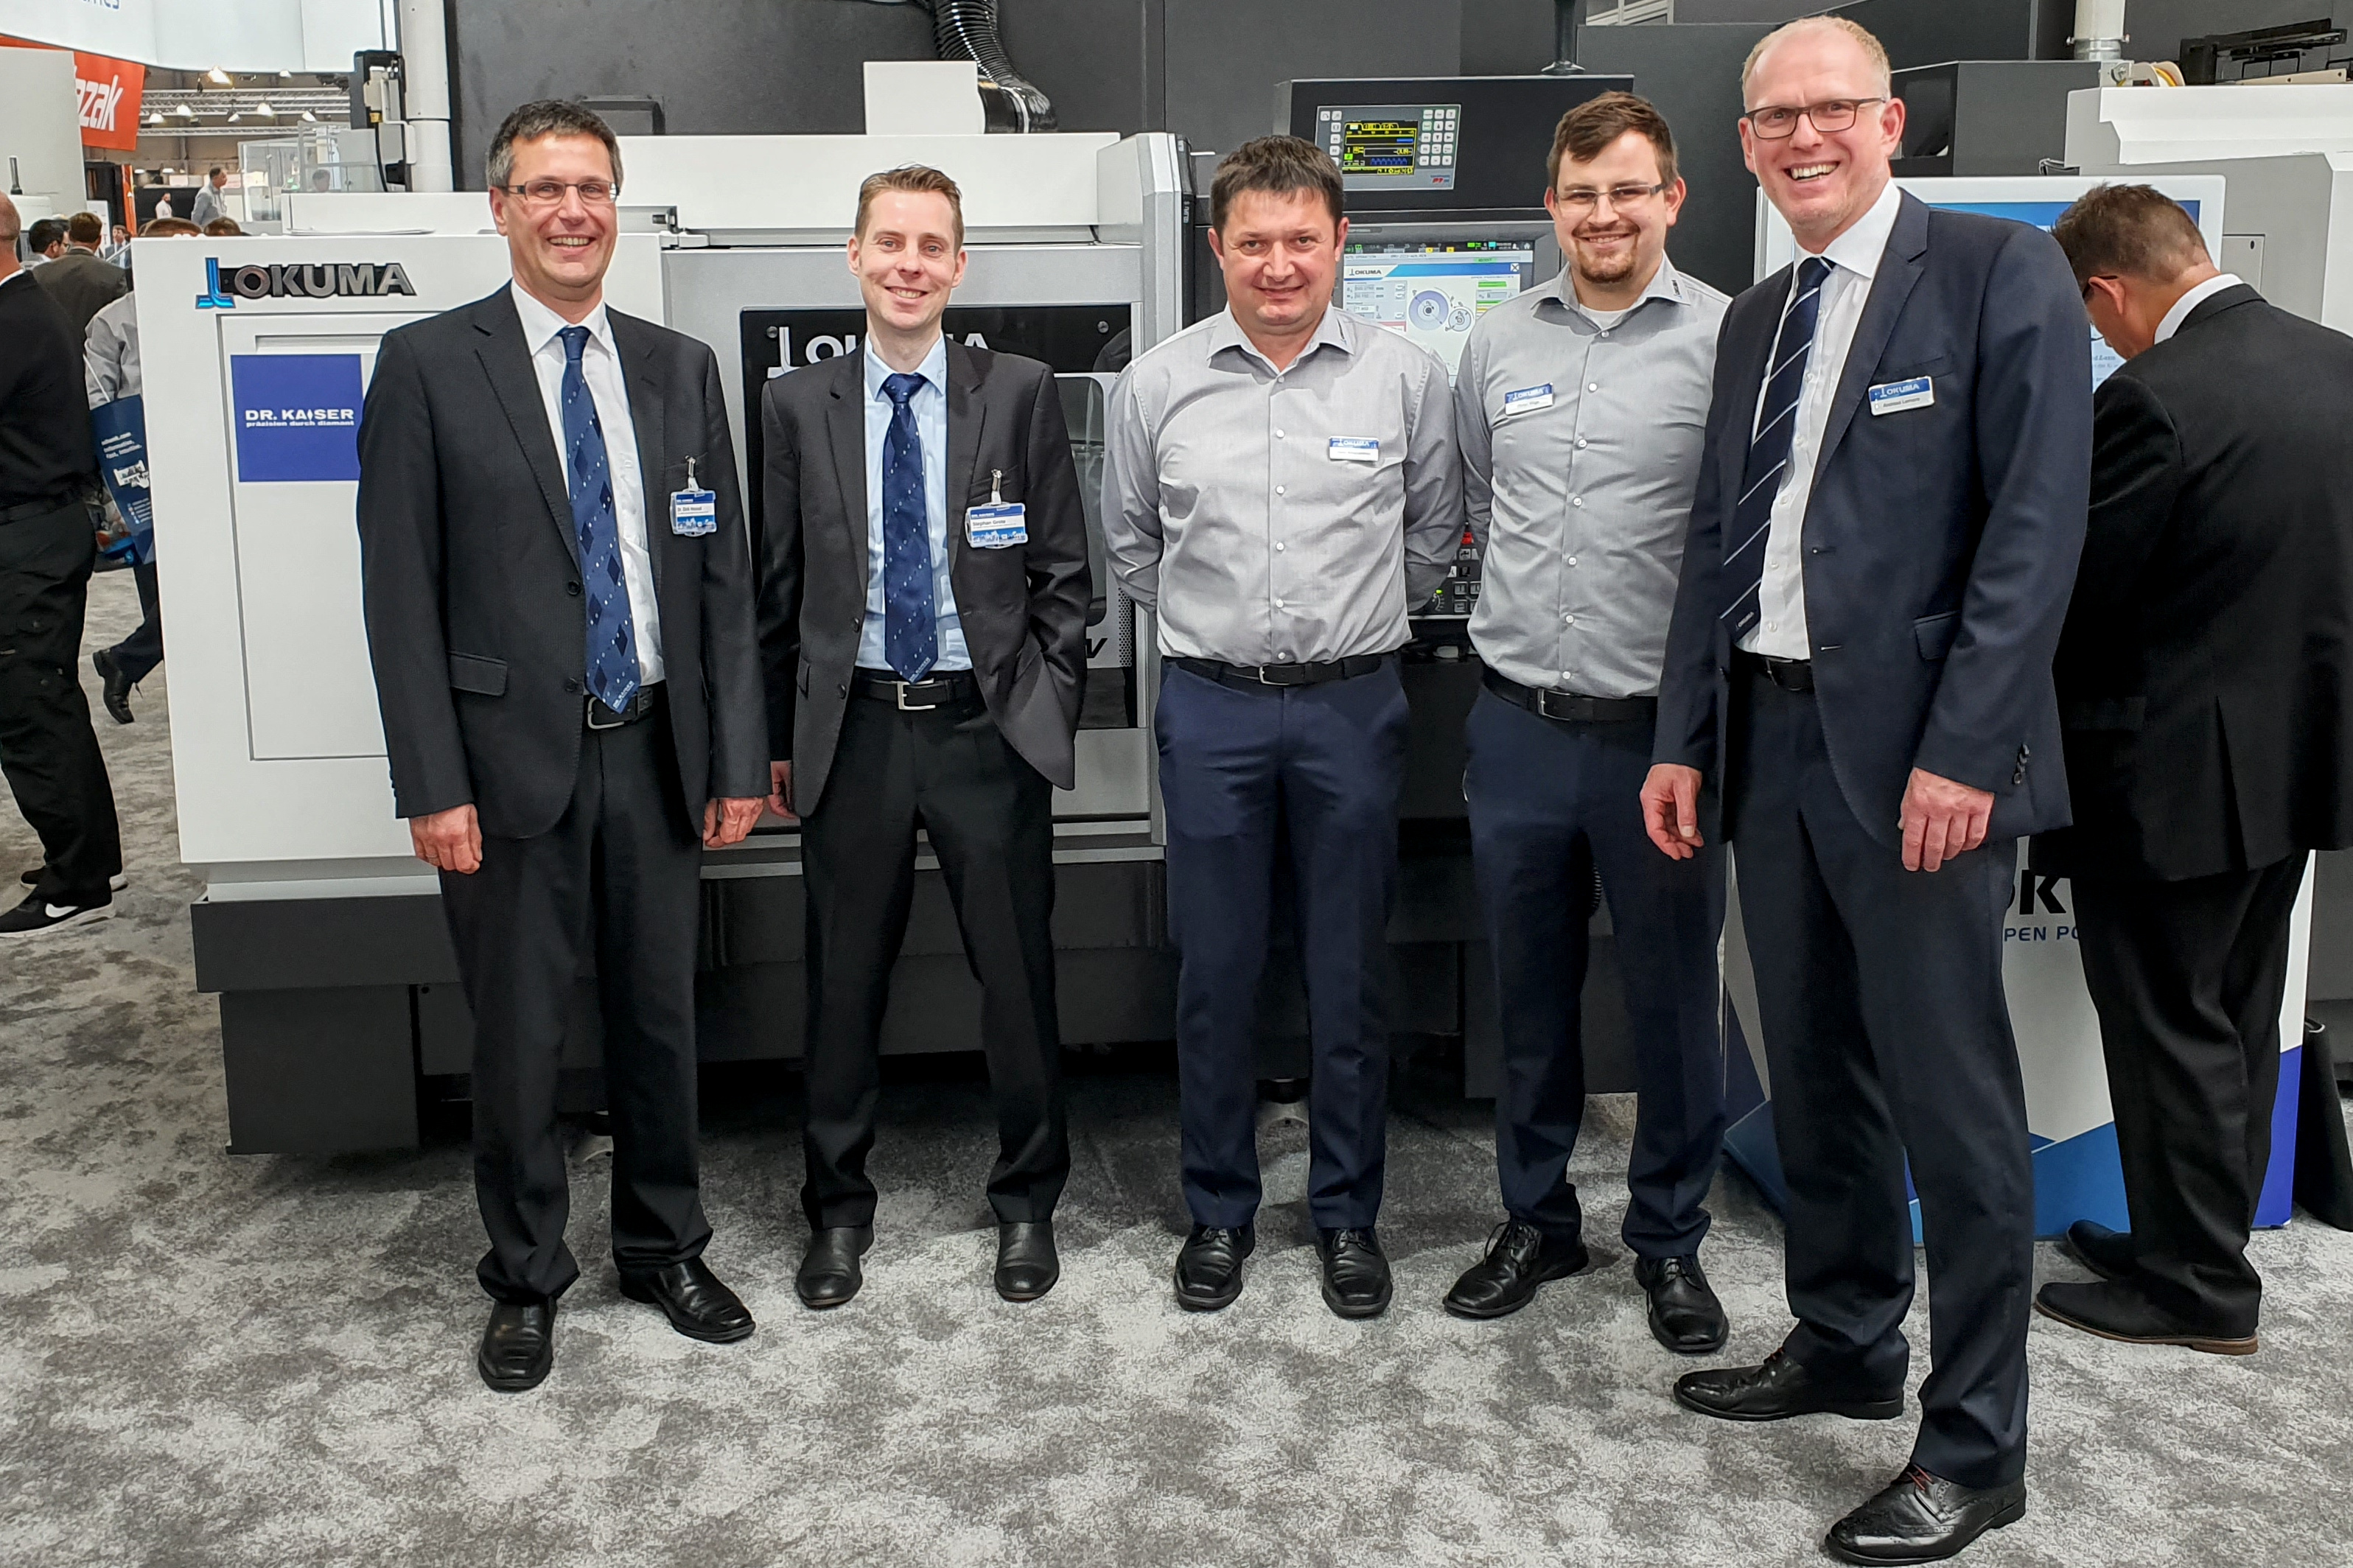 COOPERATION OF OKUMA AND DR. KAISER GRINDING EXPERTS COMBINE EXPERTISE